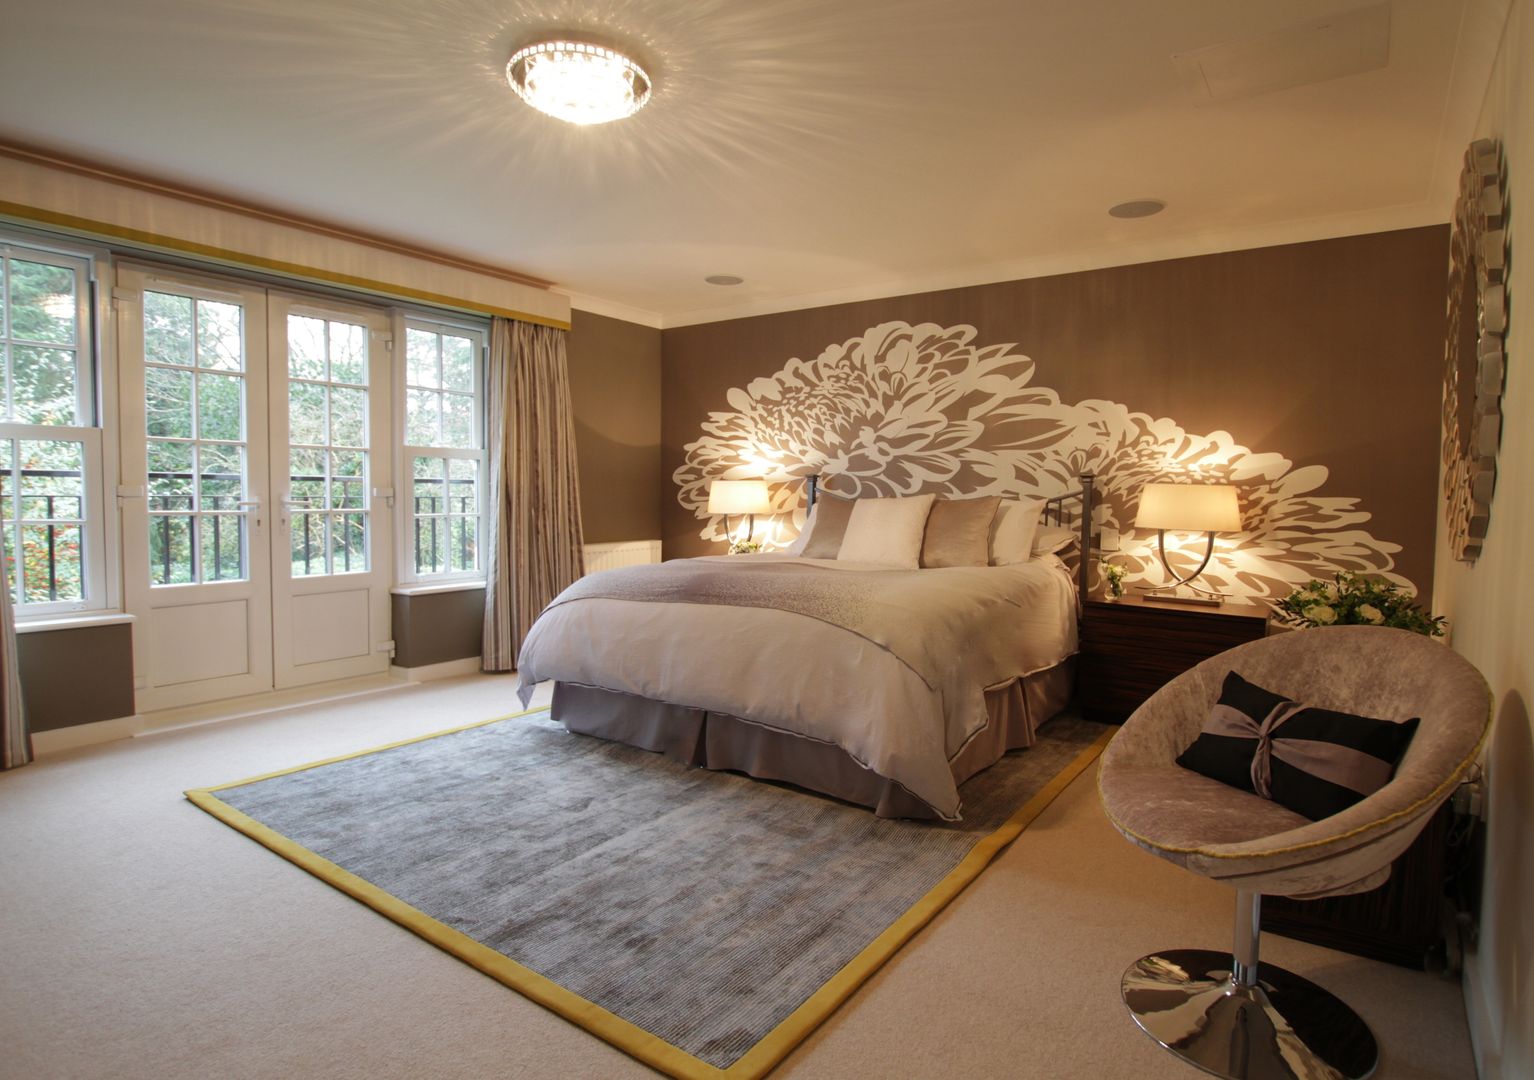 A Stunning Master Bedroom with White Floral Wall Mural & Lime Edge Rug Design by Deborah Ltd Modern style bedroom